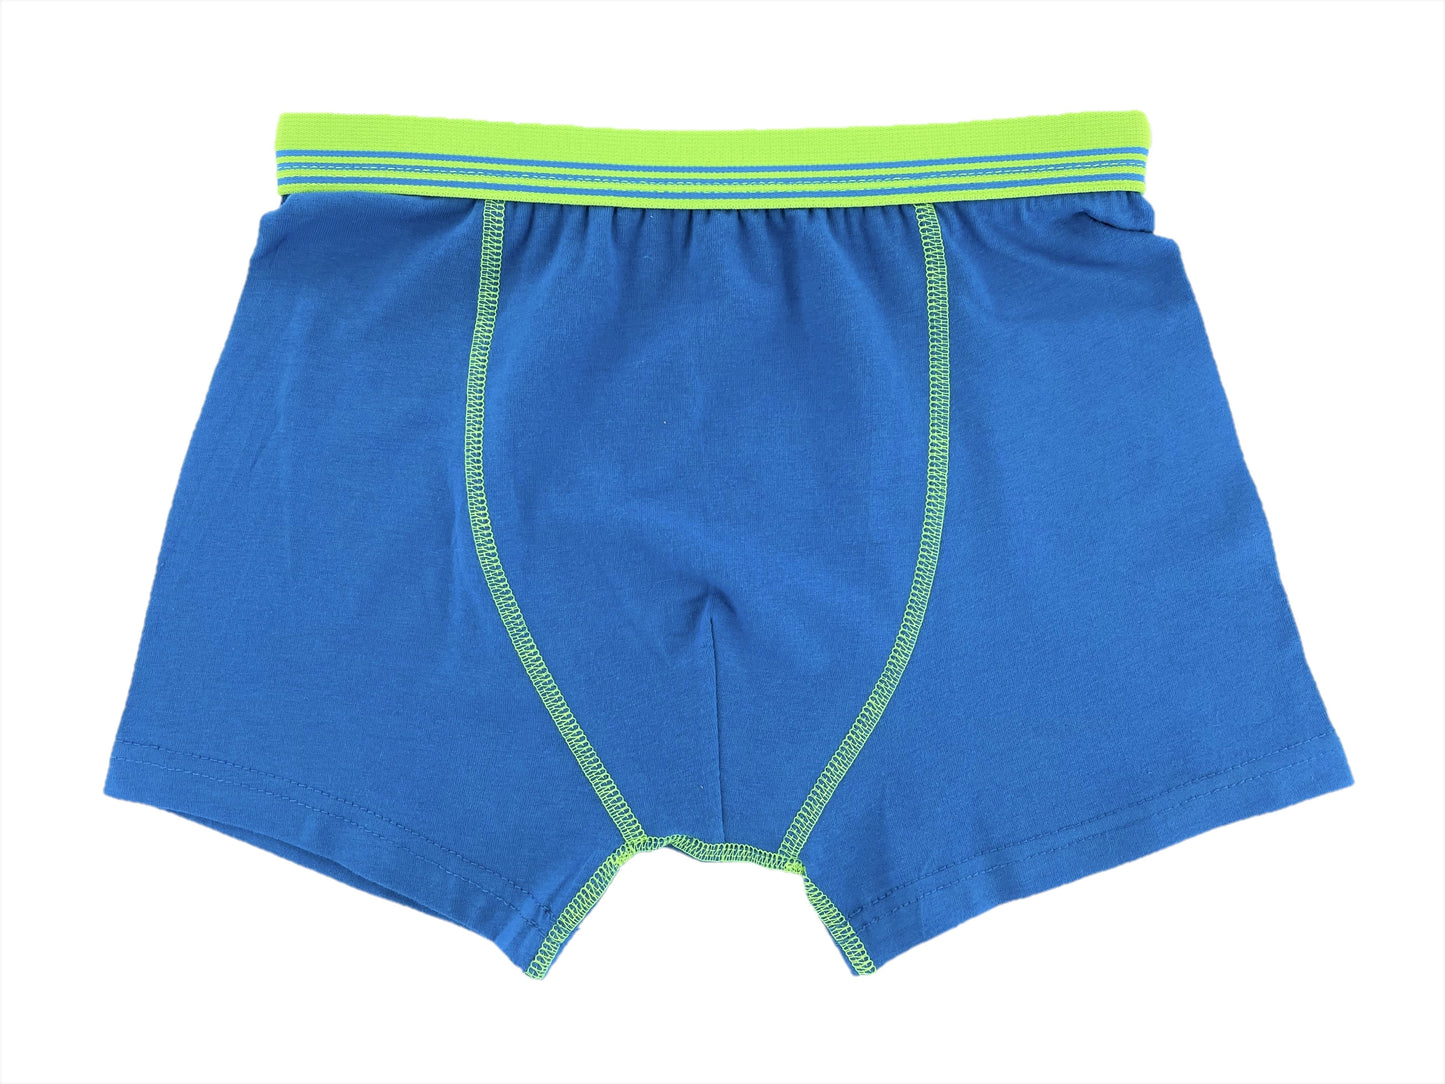 6 Pairs Boys Stretch Cotton Jersey Trunks Boxer Shorts